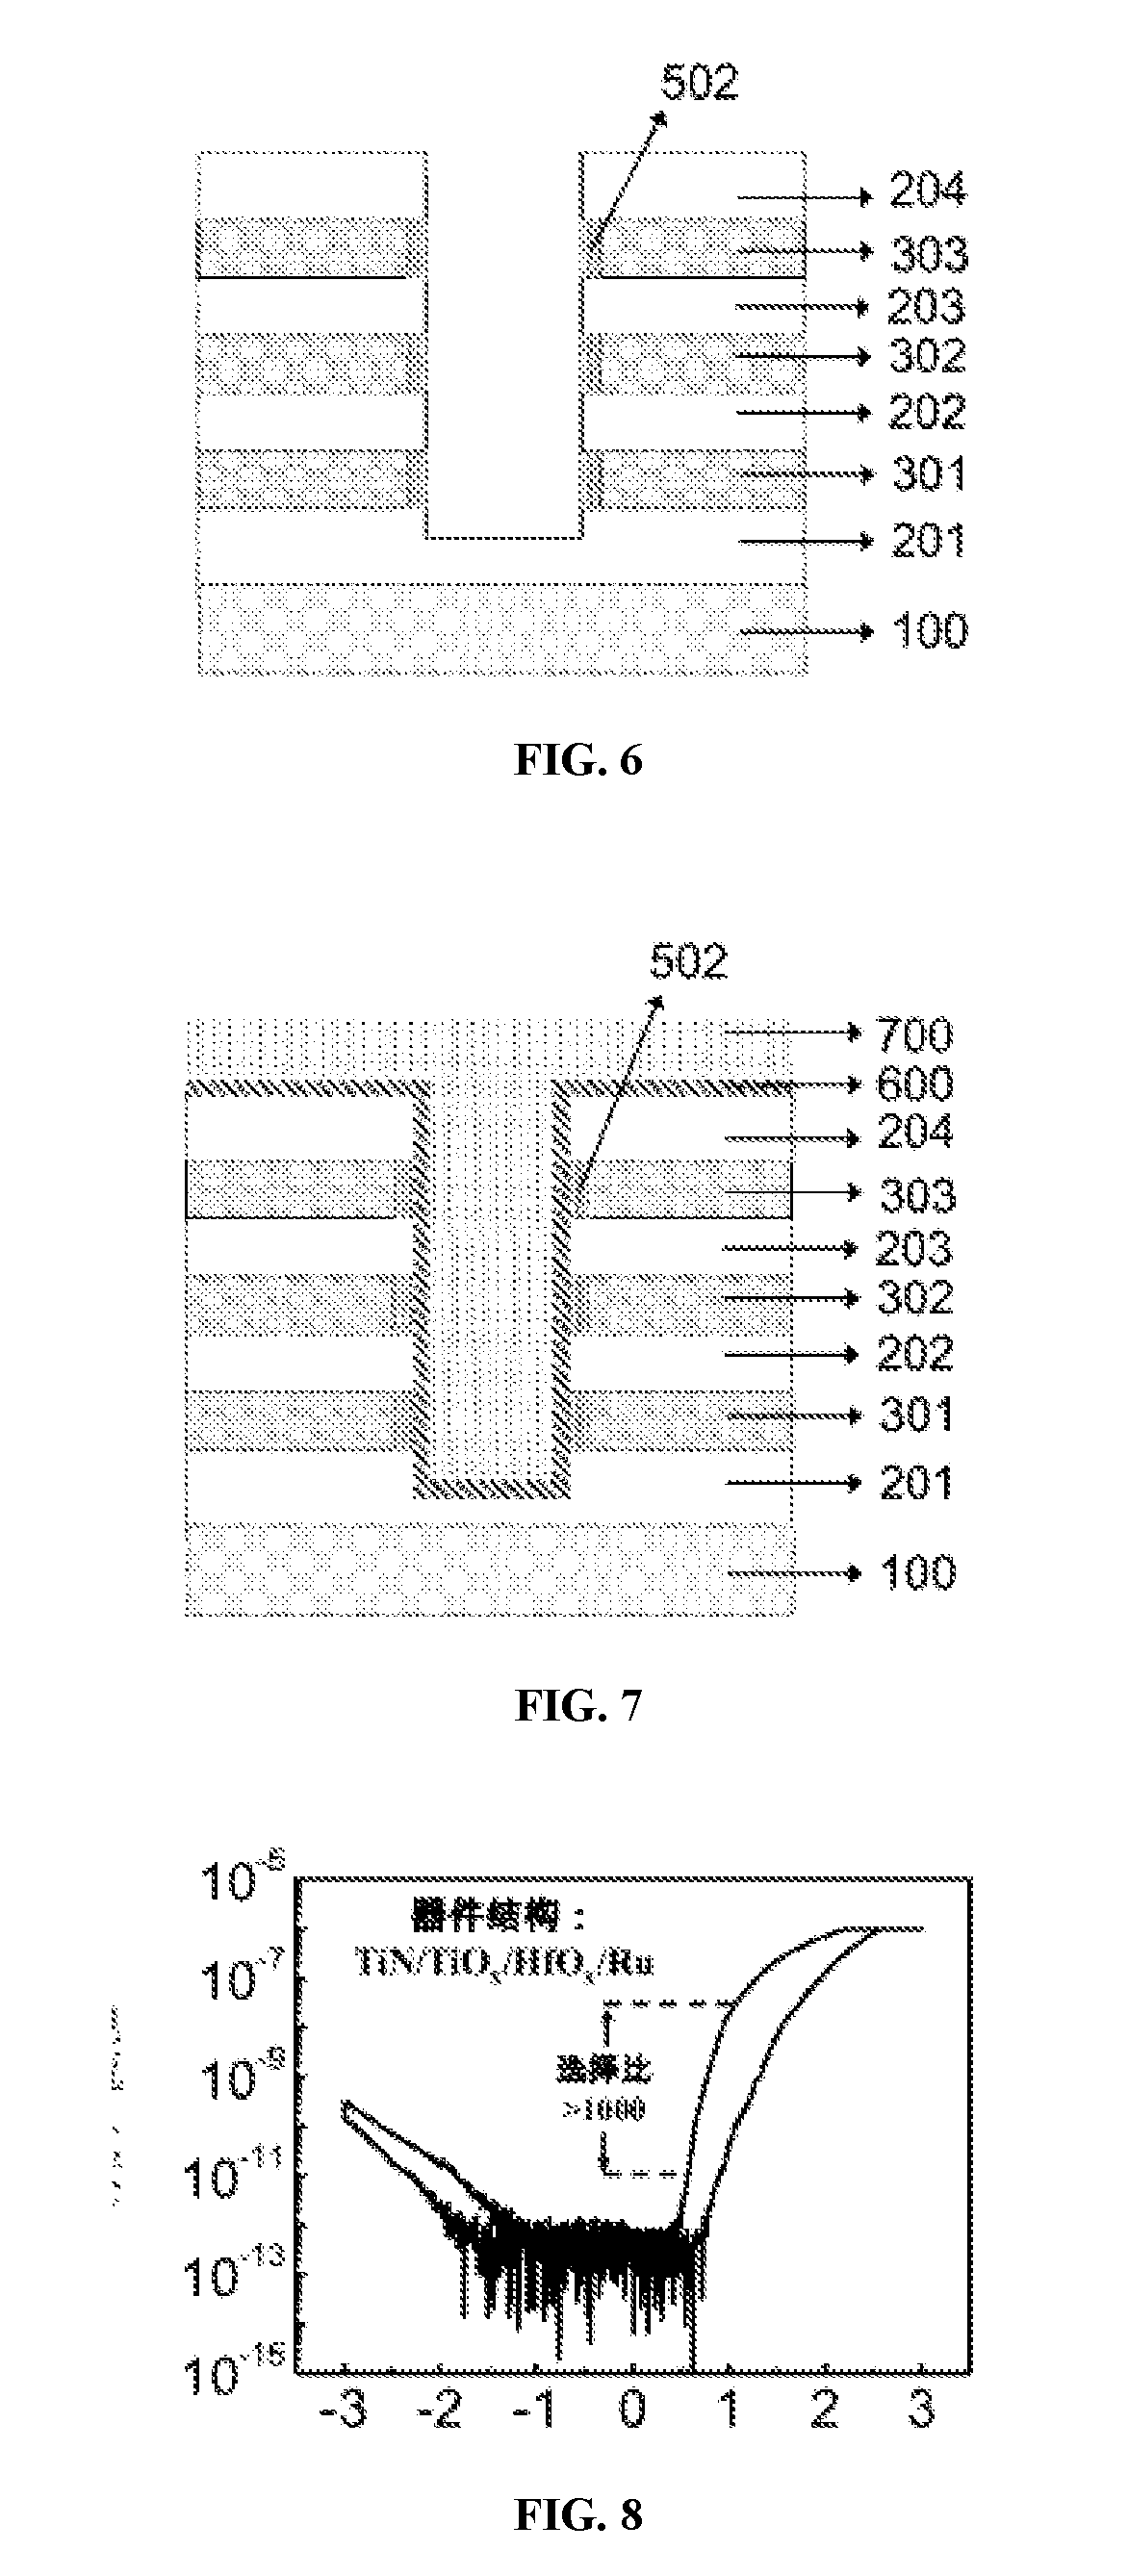 Self-gating resistive storage device and method for fabrication thereof